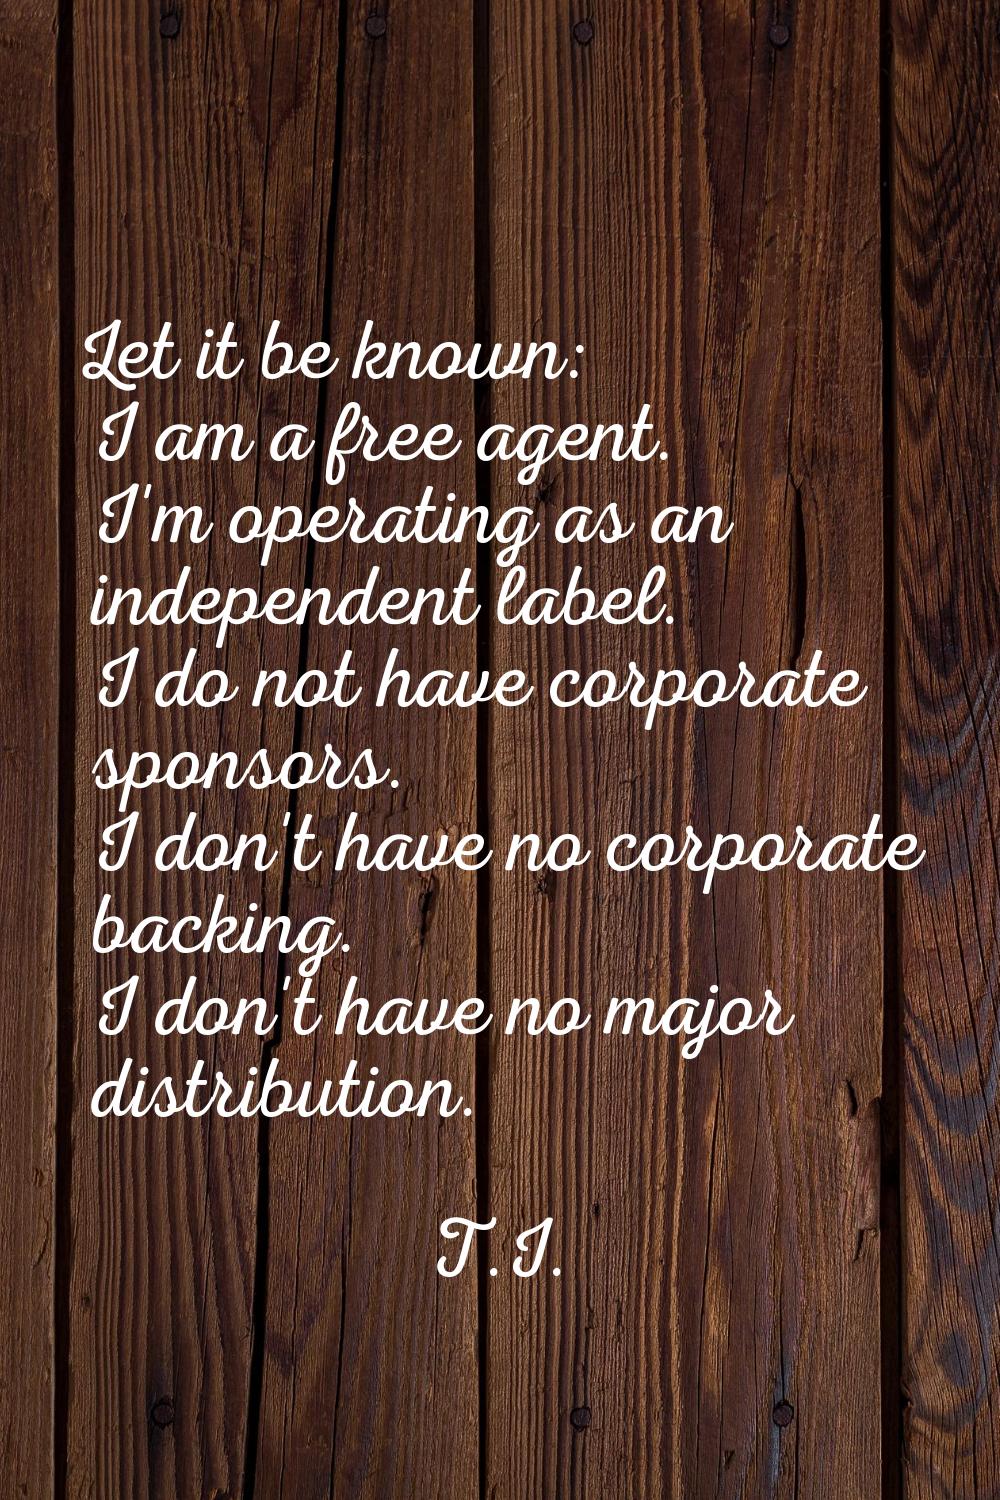 Let it be known: I am a free agent. I'm operating as an independent label. I do not have corporate 